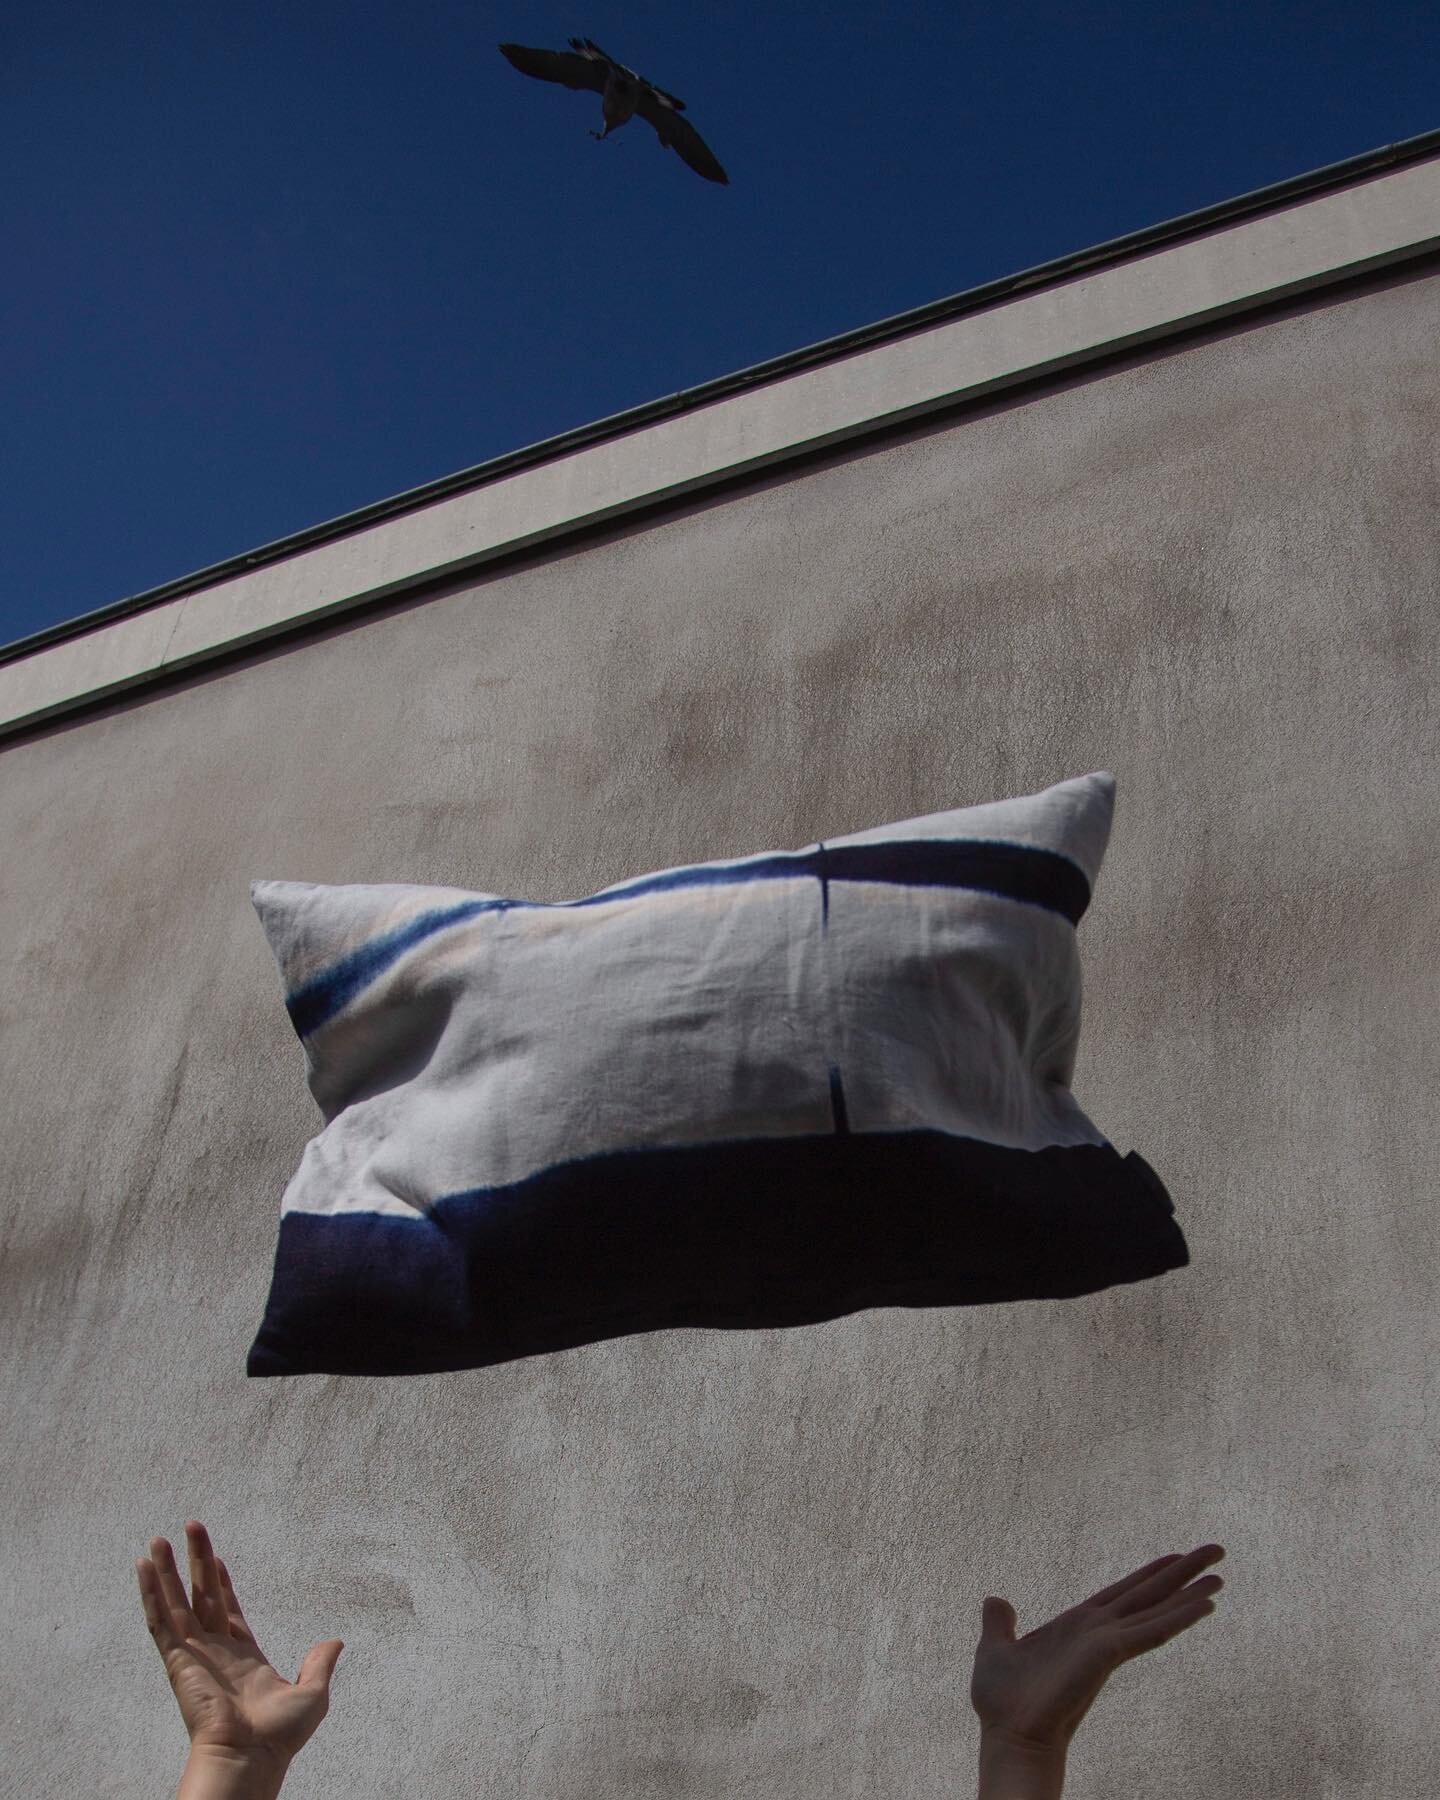 FROM JAPAN WITH LOVE / Explore a carefully curated selection of Nuisuji shibori and Itajime shibori cushions by @suzusan_official. Dyed by hand, all pieces are available in a dark blue and white or black and white colourway. To place an order, please